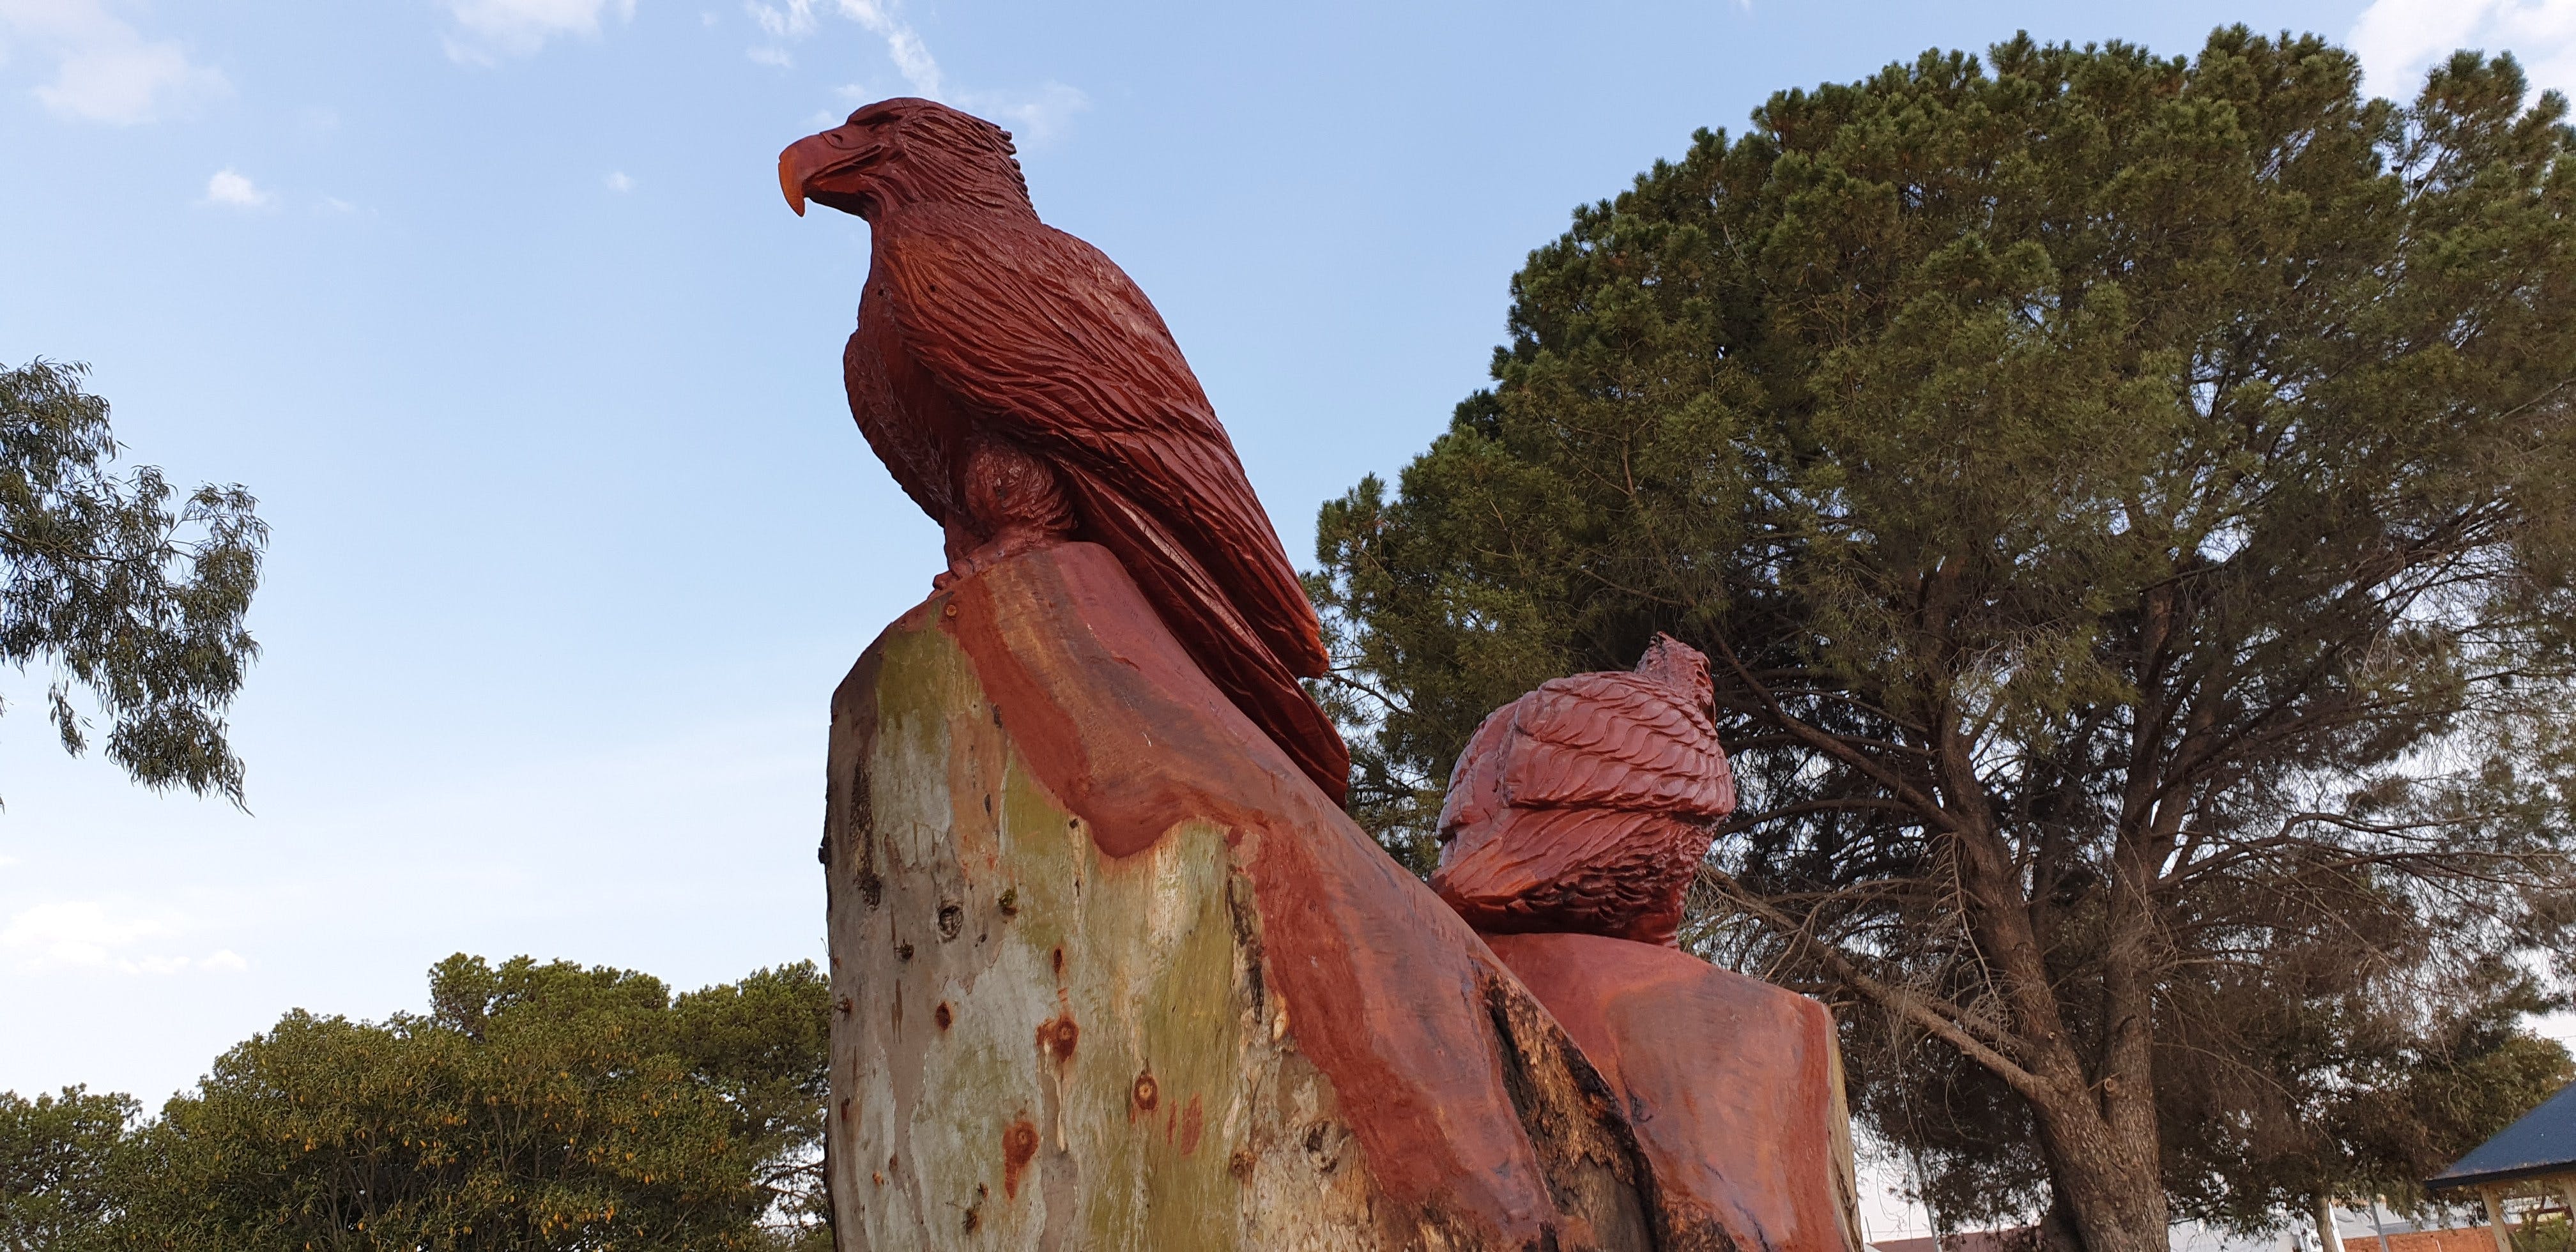 Chainsaw Tree Sculpture - Accommodation Nelson Bay